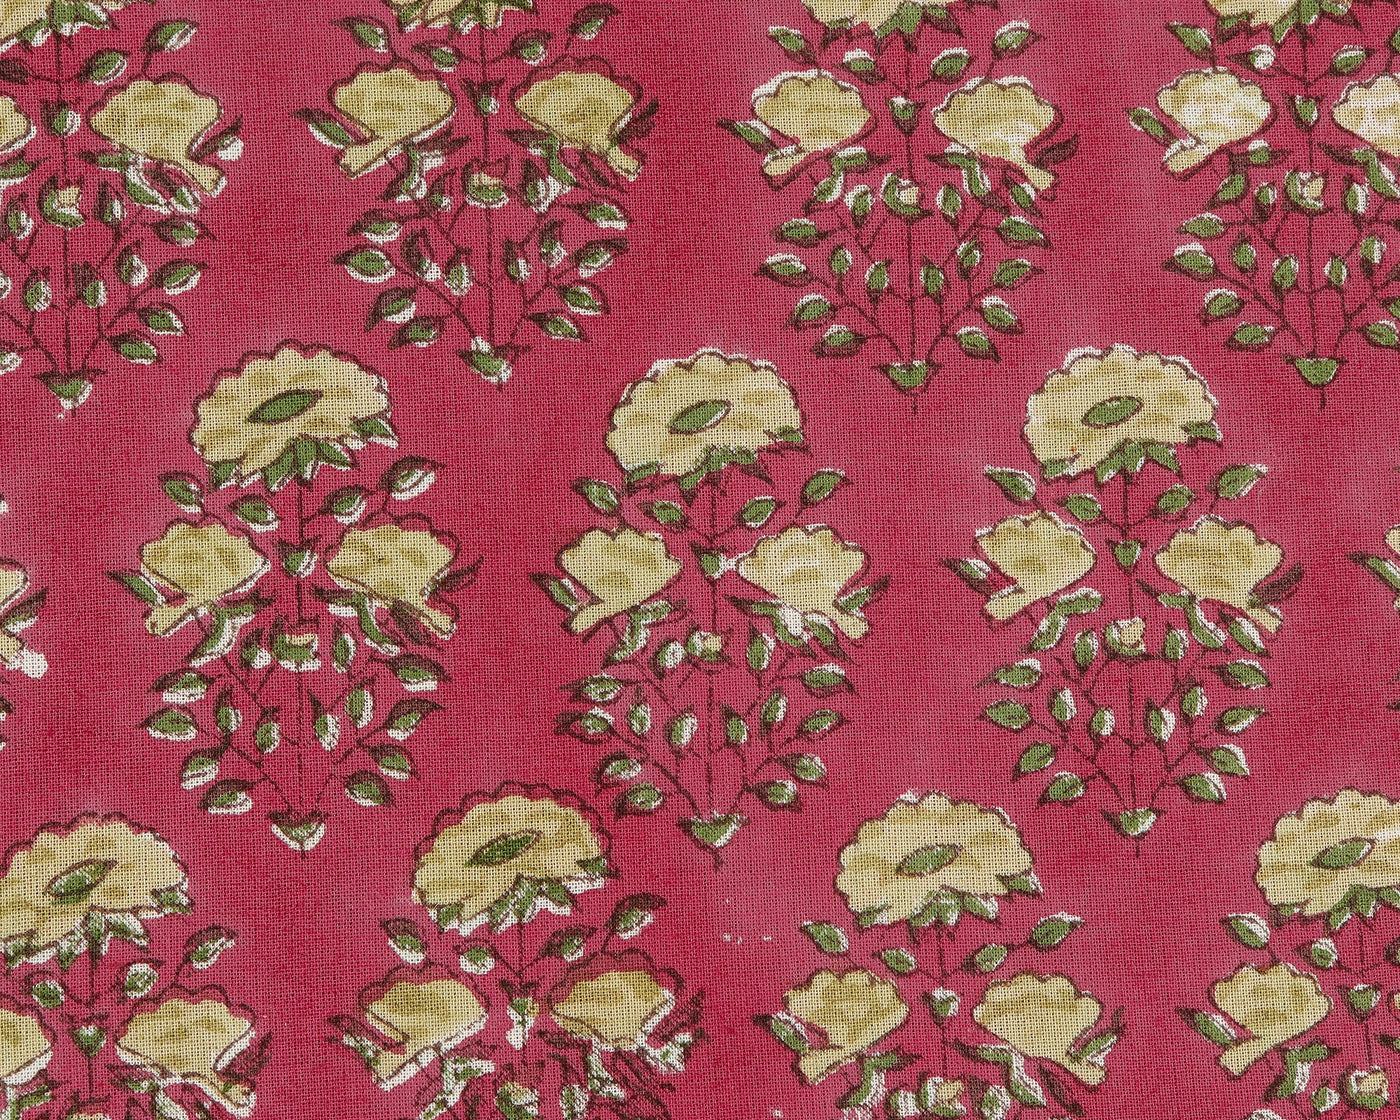 Fabricrush Thistle Pink, Laurel and Olive Green Indian Floral Hand Block Printed Cotton Cloth Napkins, 18x18"- Cocktail Napkin, 20x20"- Dinner Napkins